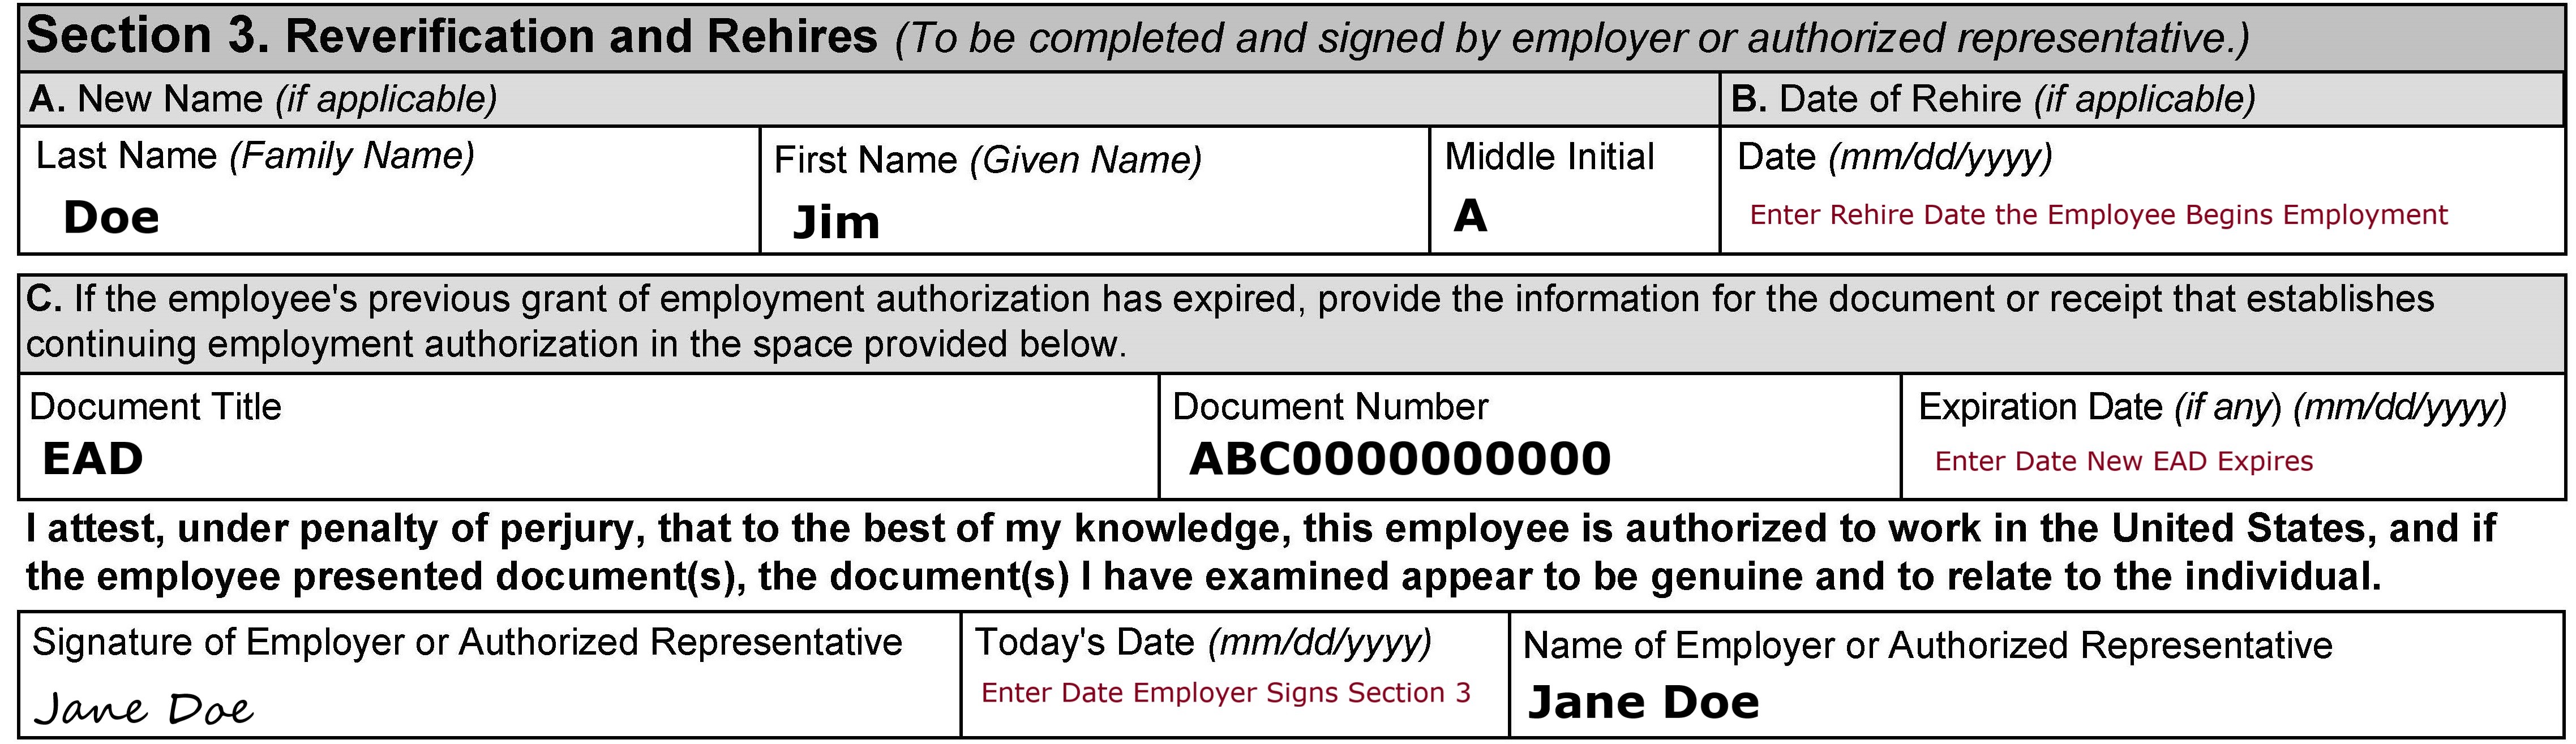 Image of an example Section 3 of Form I-9 completed by an employer: The example shows all of the fields fully completed. The example also instructs employers to enter the date the employee began employment in the “Date or Rehire” field, and the date the employer completes Section 3 in the “Today’s Date” field. complete Section 1 in the Today’s Date field.